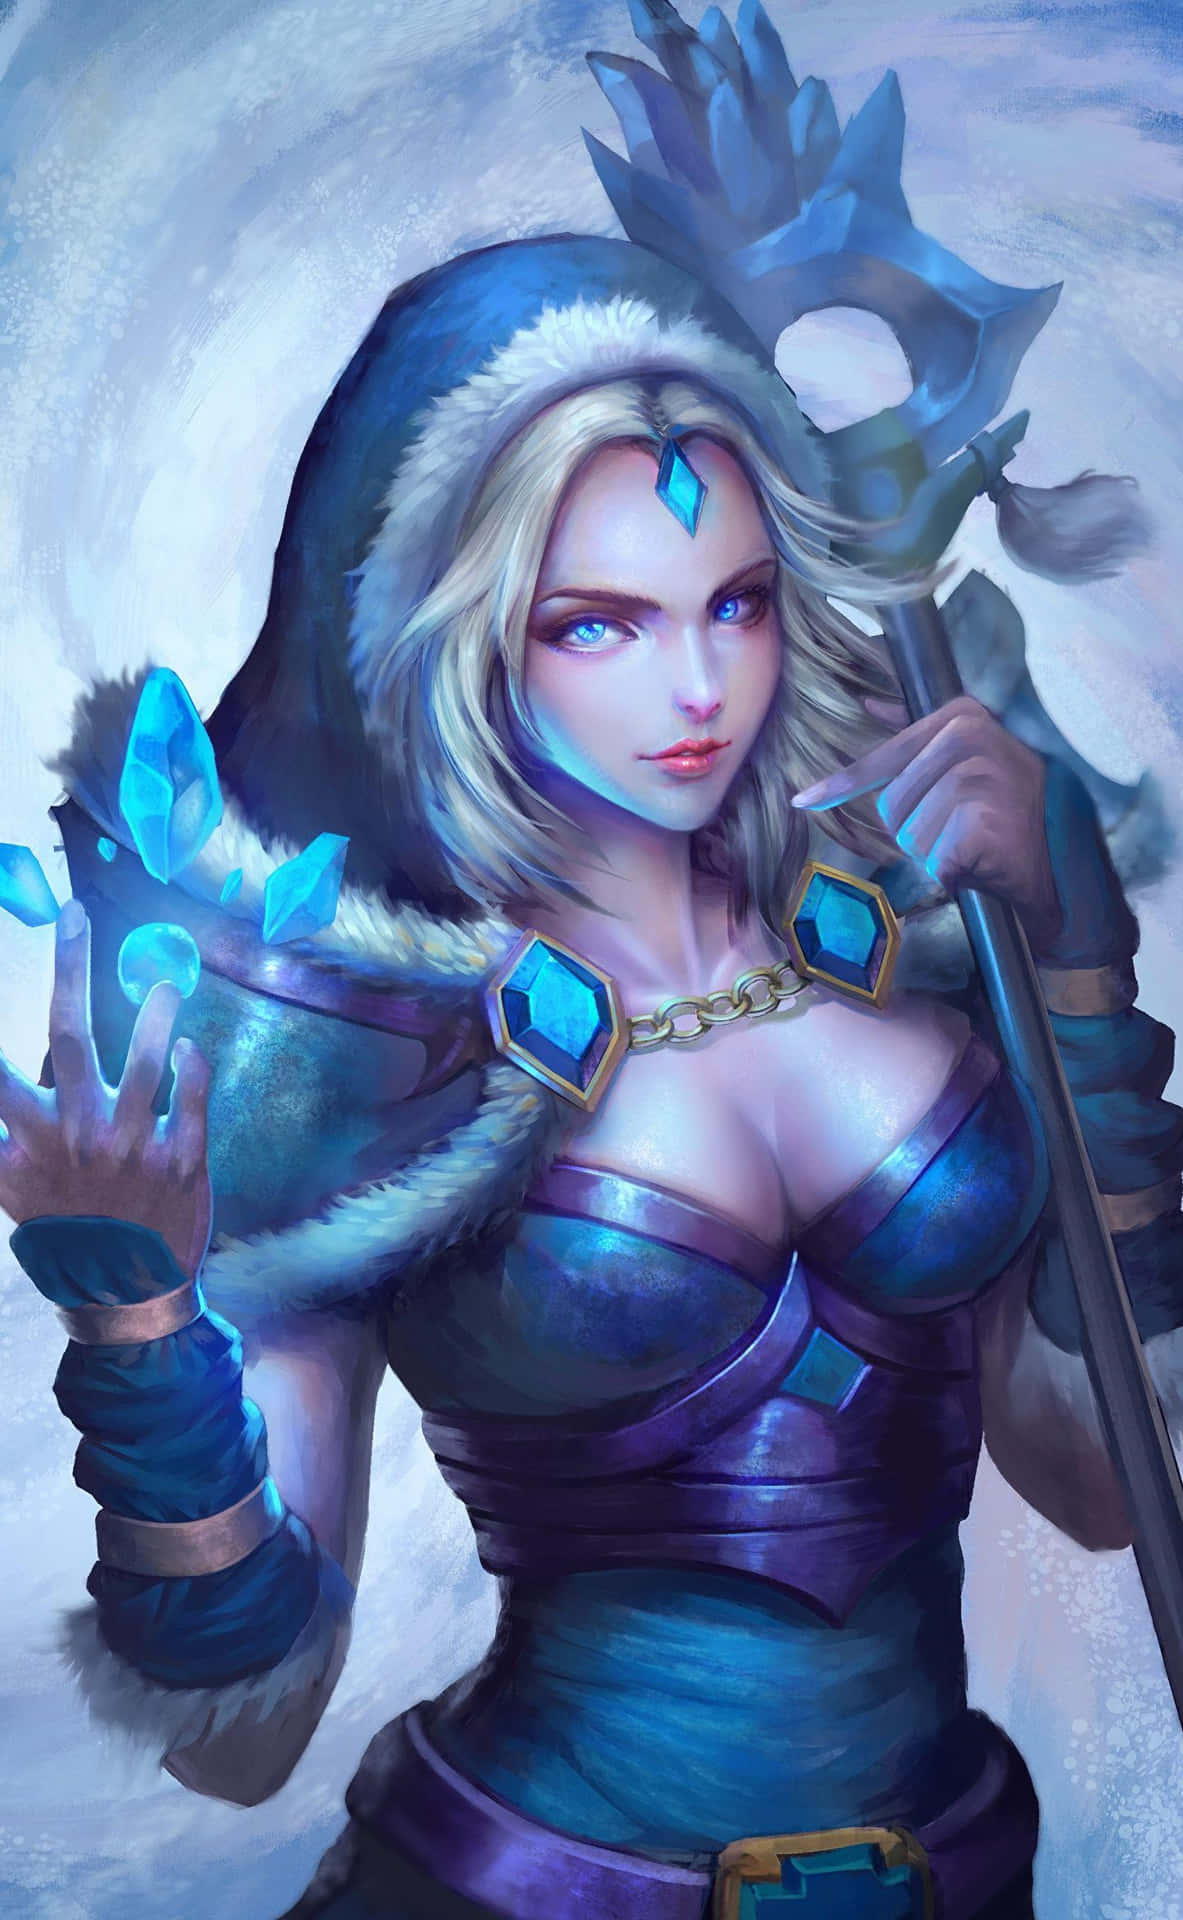 Enchanting Crystal Maiden amidst a snowy landscape Wallpaper